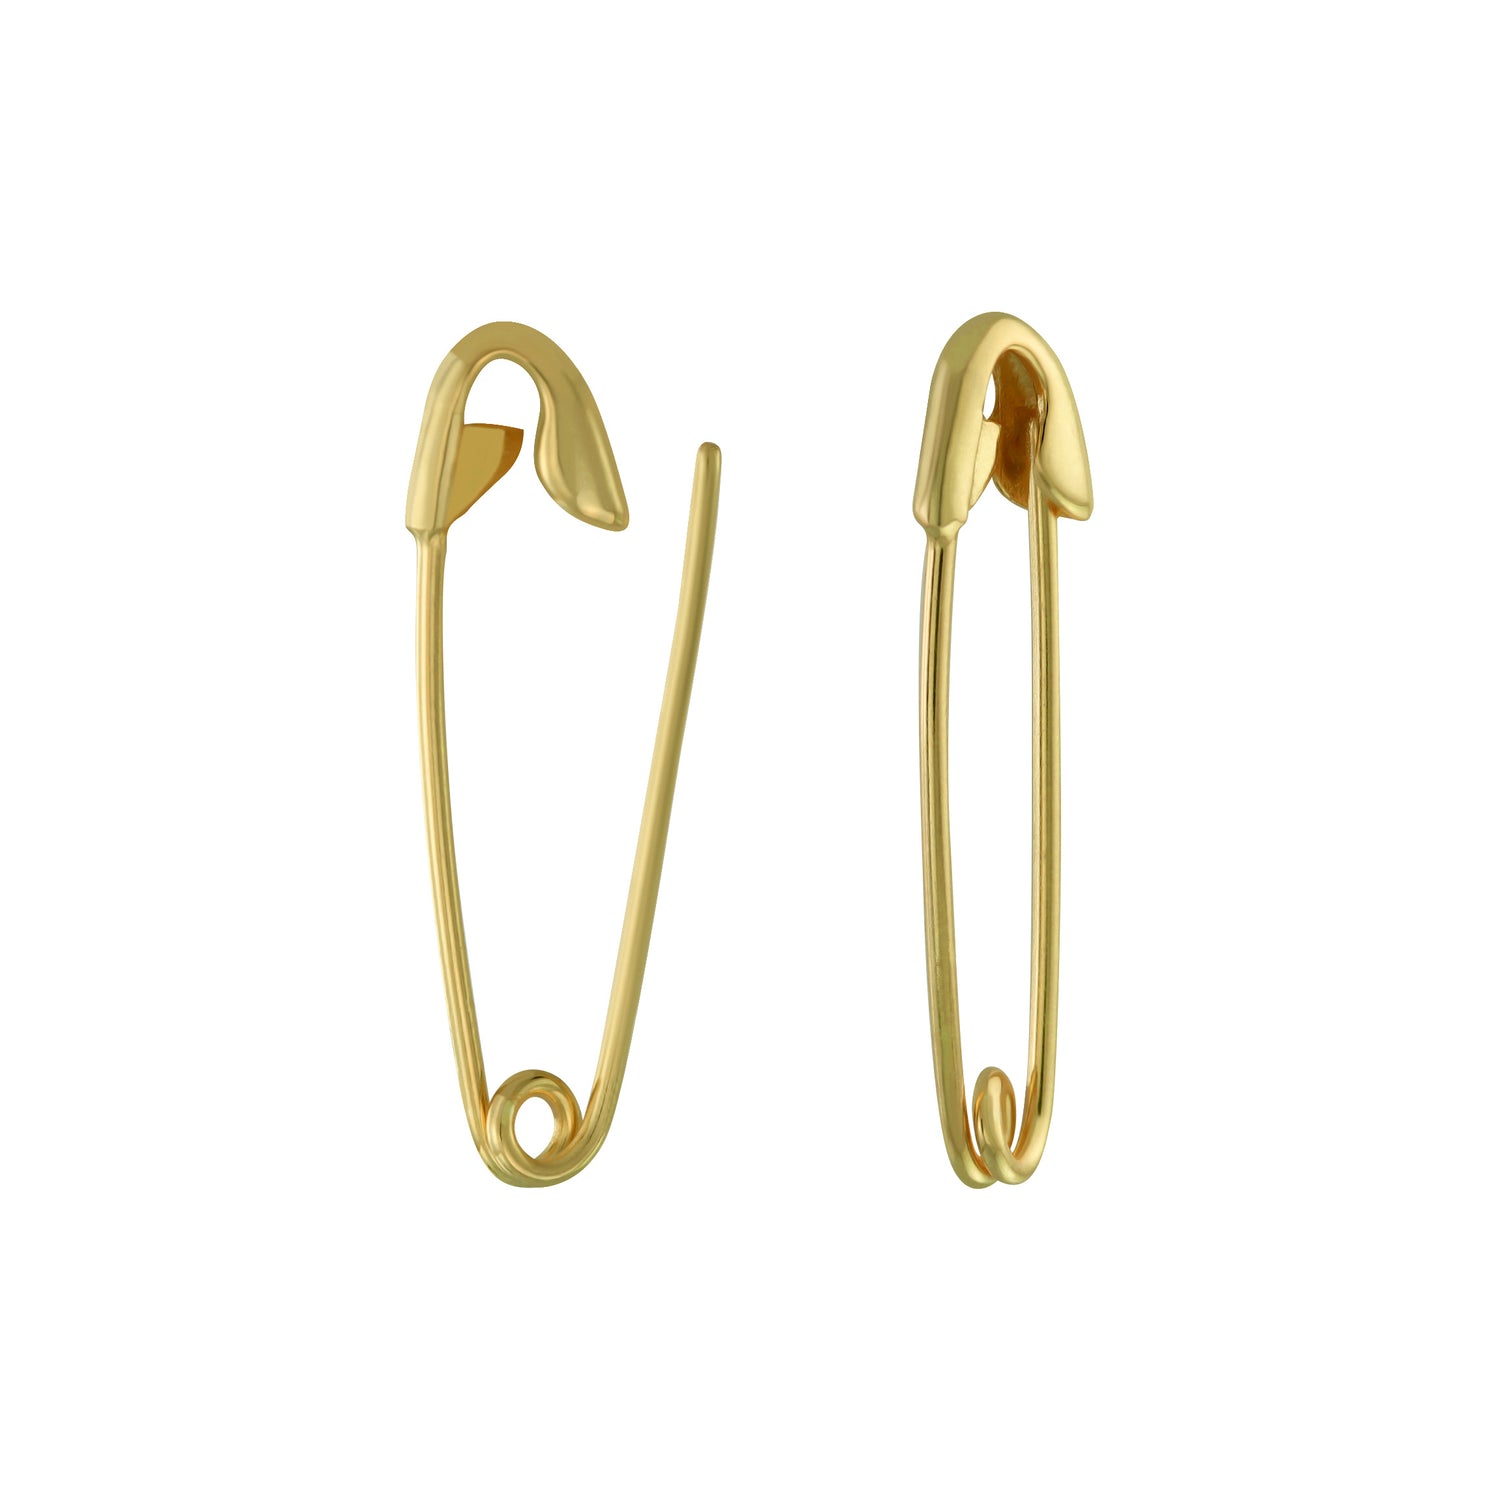 Traditional Brass Safety Pins - Wholesale Prices on Safety Pins by